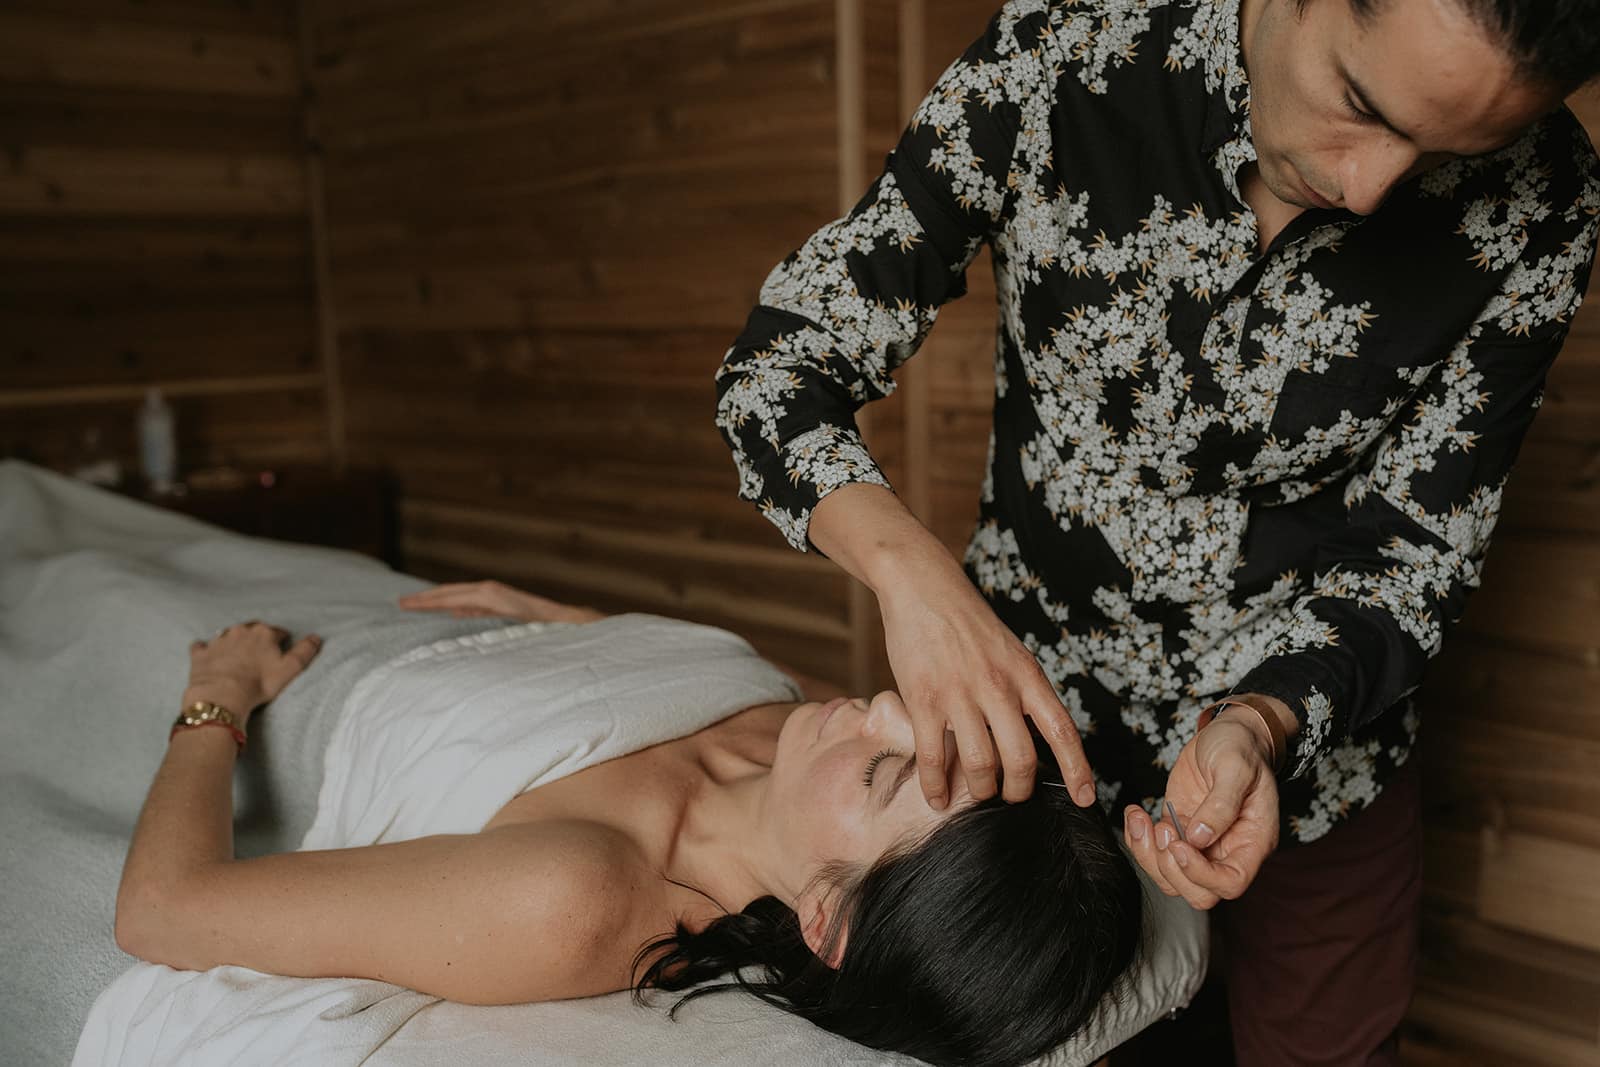 Acupuncturist applying needles on a patient's head to boost fertility and well-being, demonstrating targeted TCM therapy.